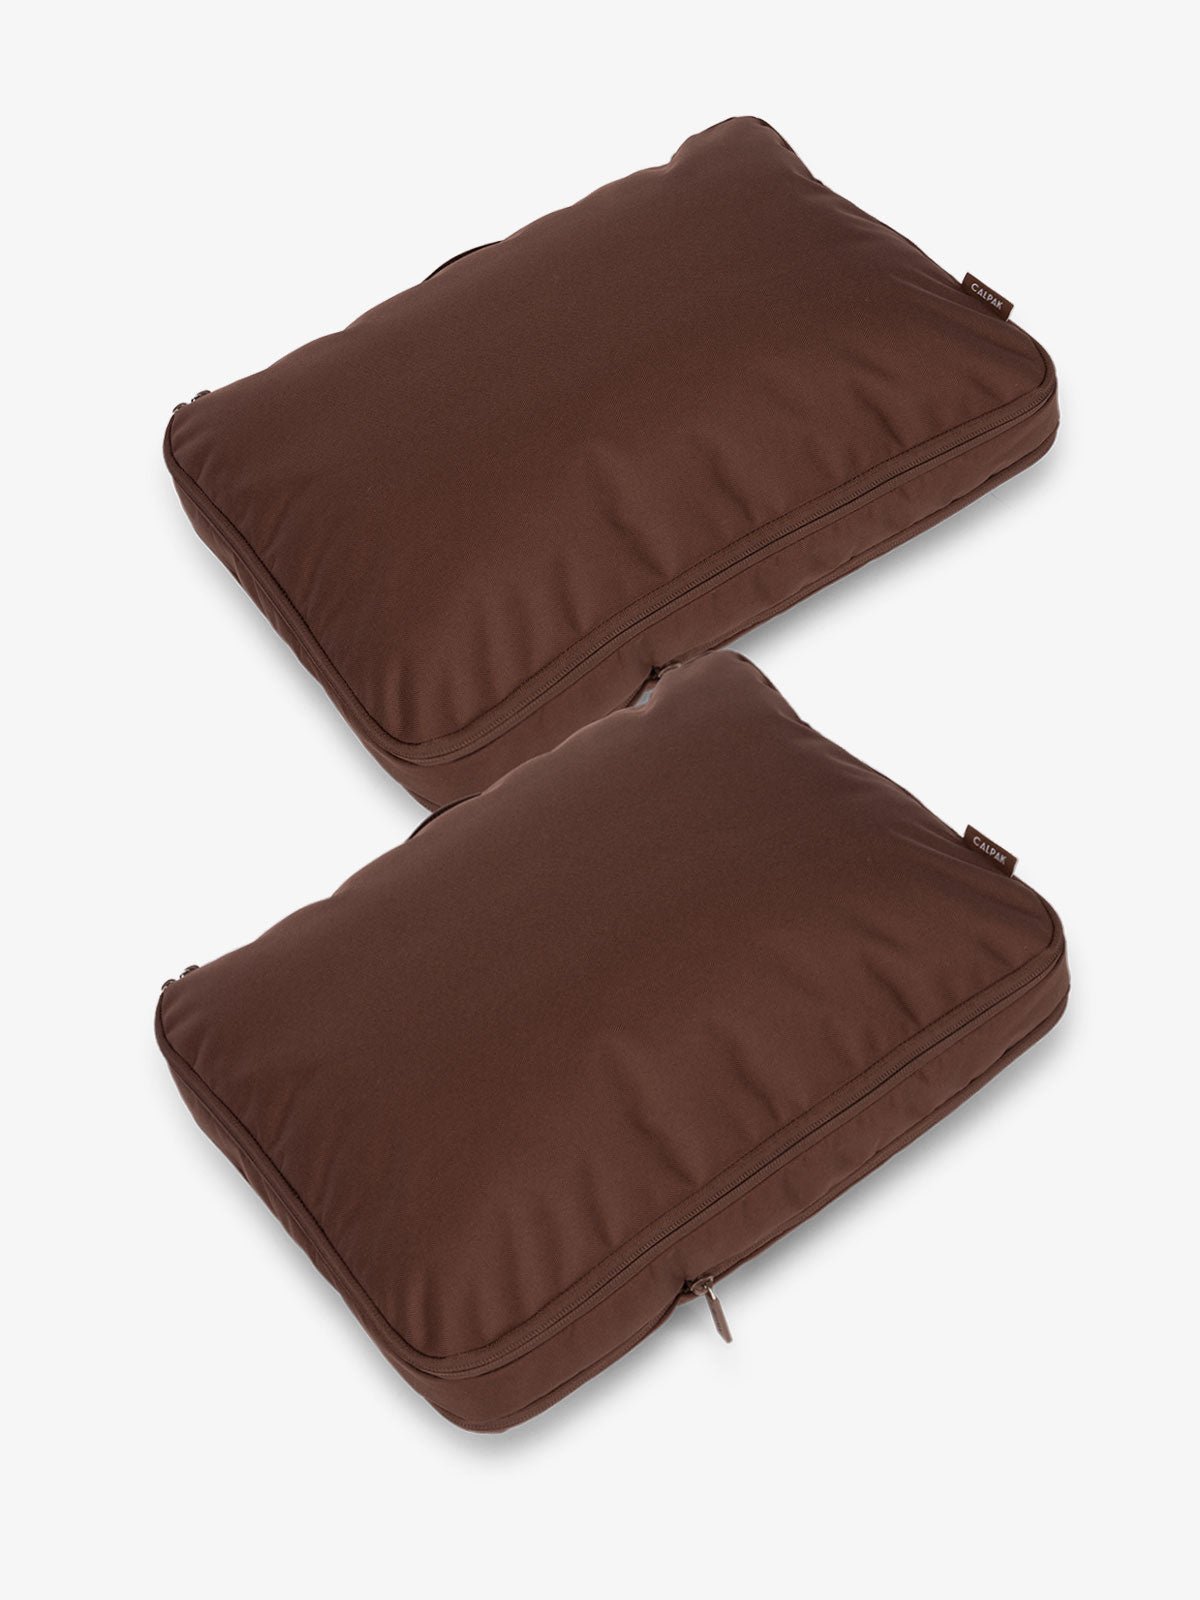 CALPAK Large Compression Packing Cubes in brown walnut